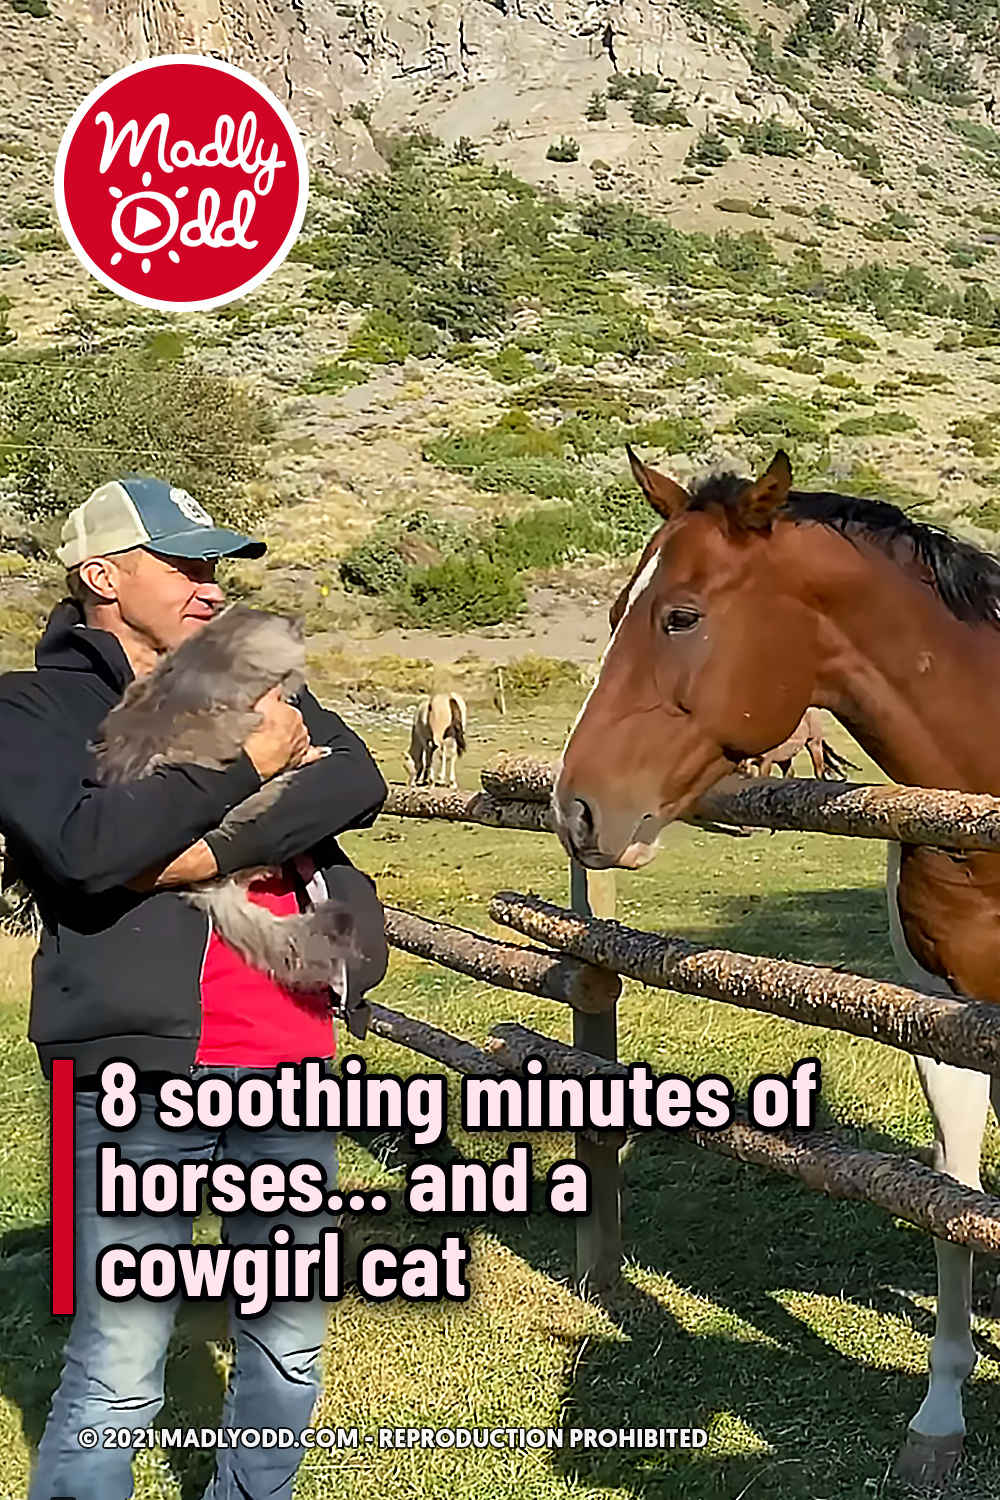 8 soothing minutes of horses… and a cowgirl cat